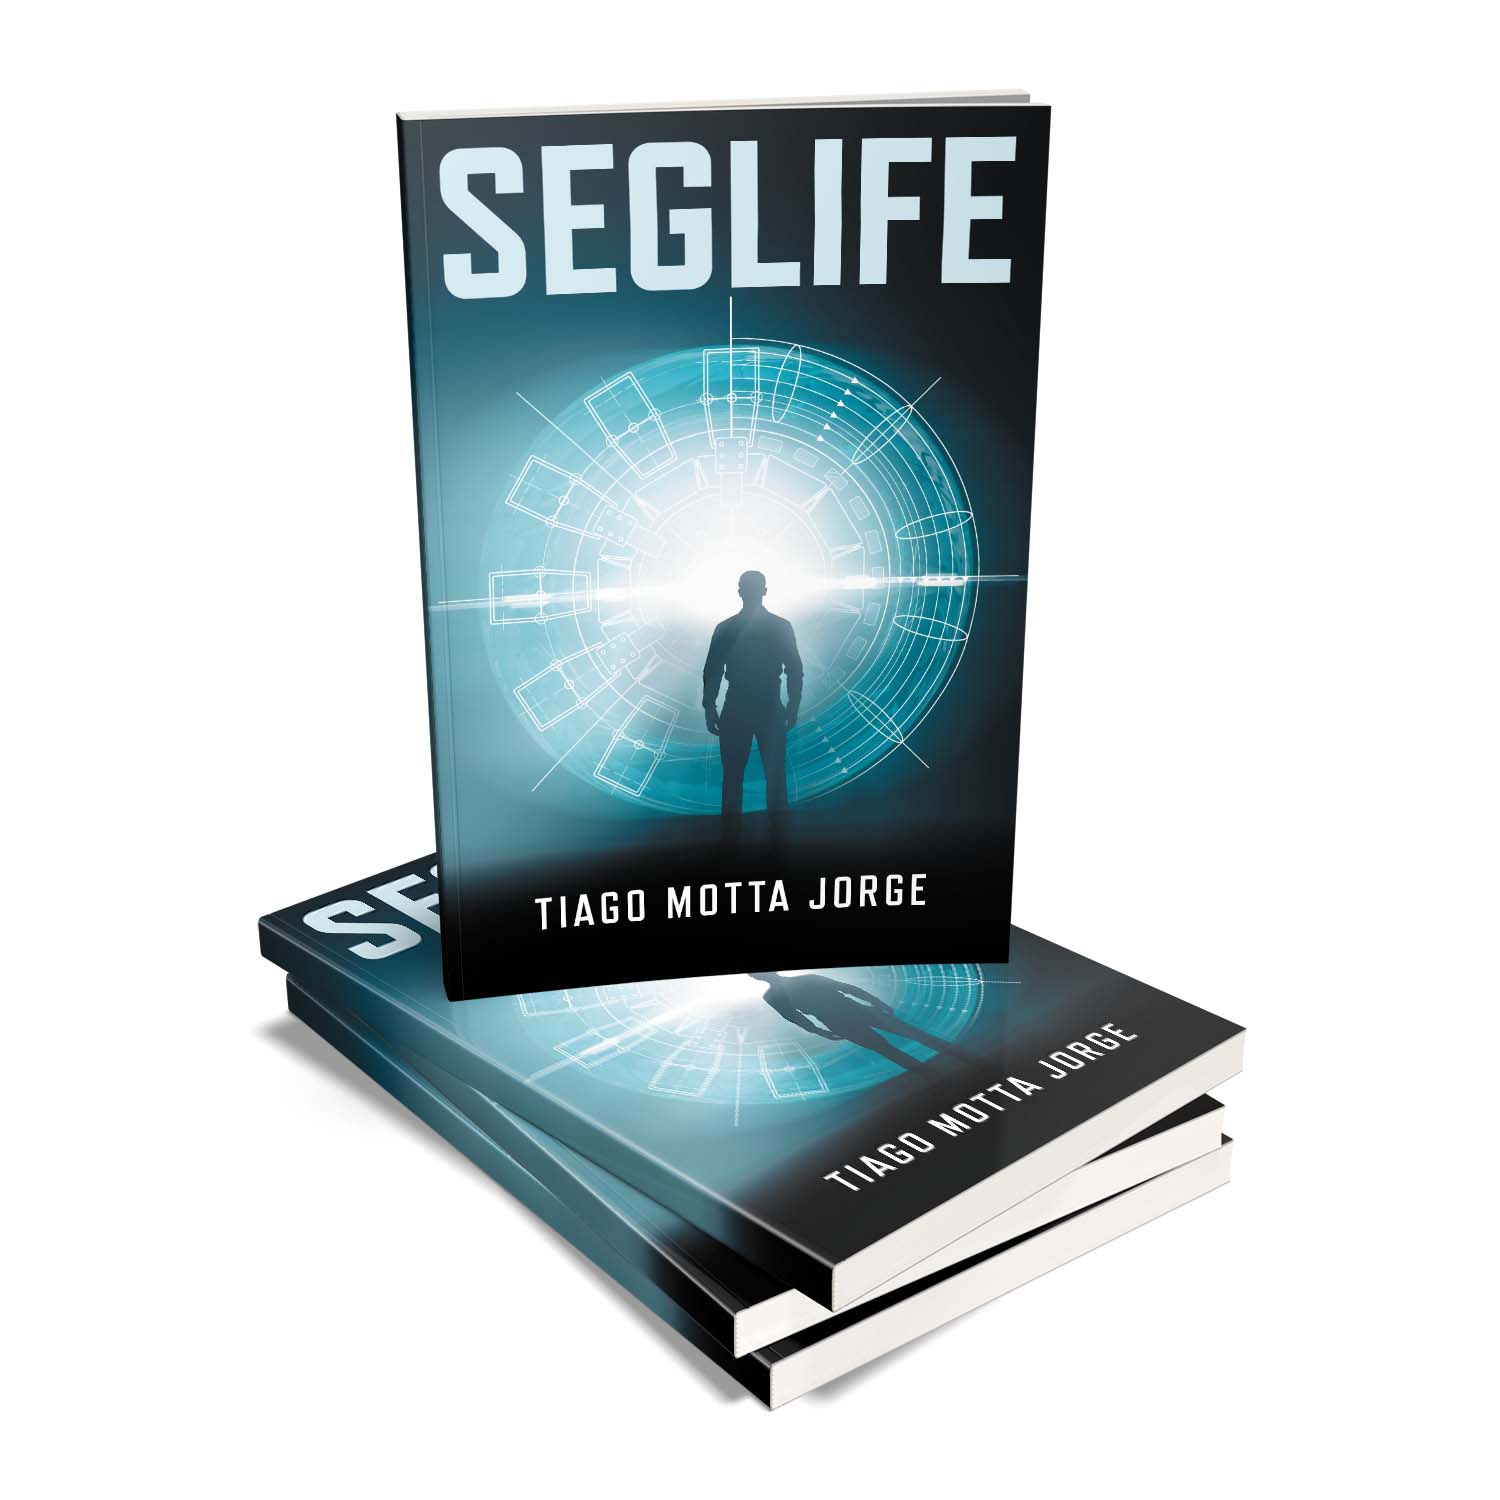 The Seglife Trilogy is reality-bending scifi series by Tiago Motta Jorge. The book covers were designed by Mark Thomas of coverness.com. To find out more about my book design services, please visit www.coverness.com